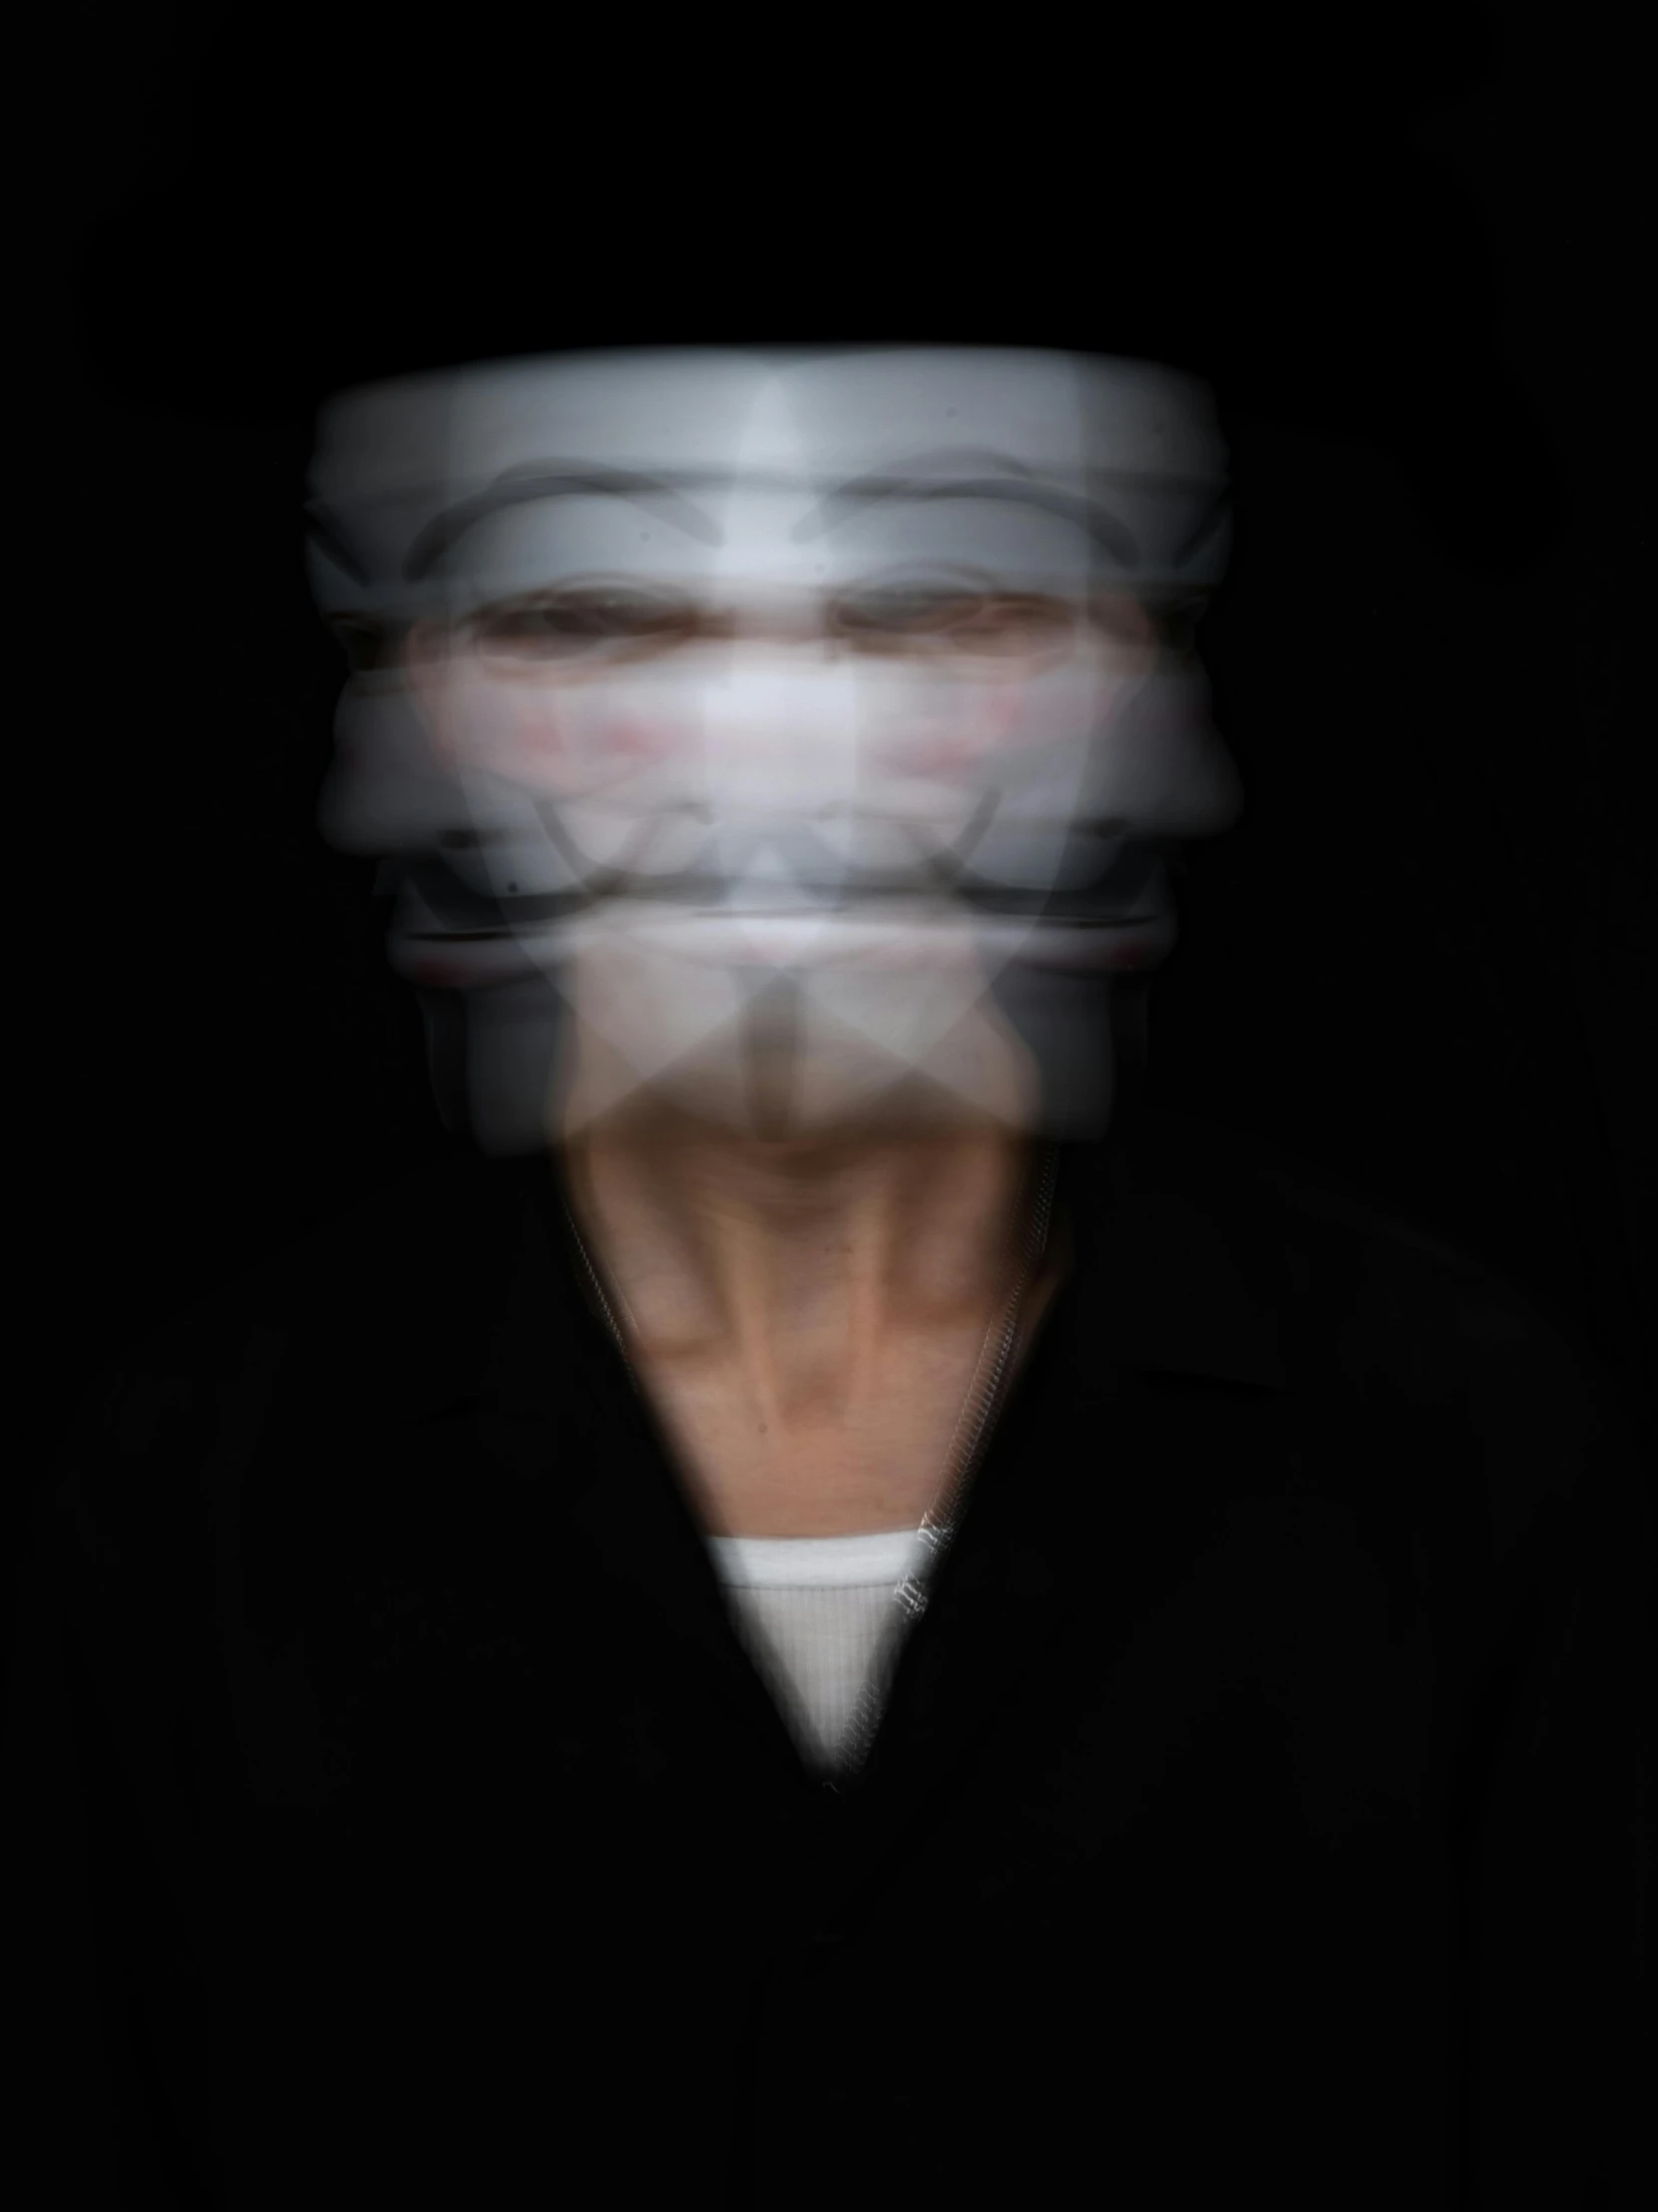 an image of blurry man with face obscured in black background